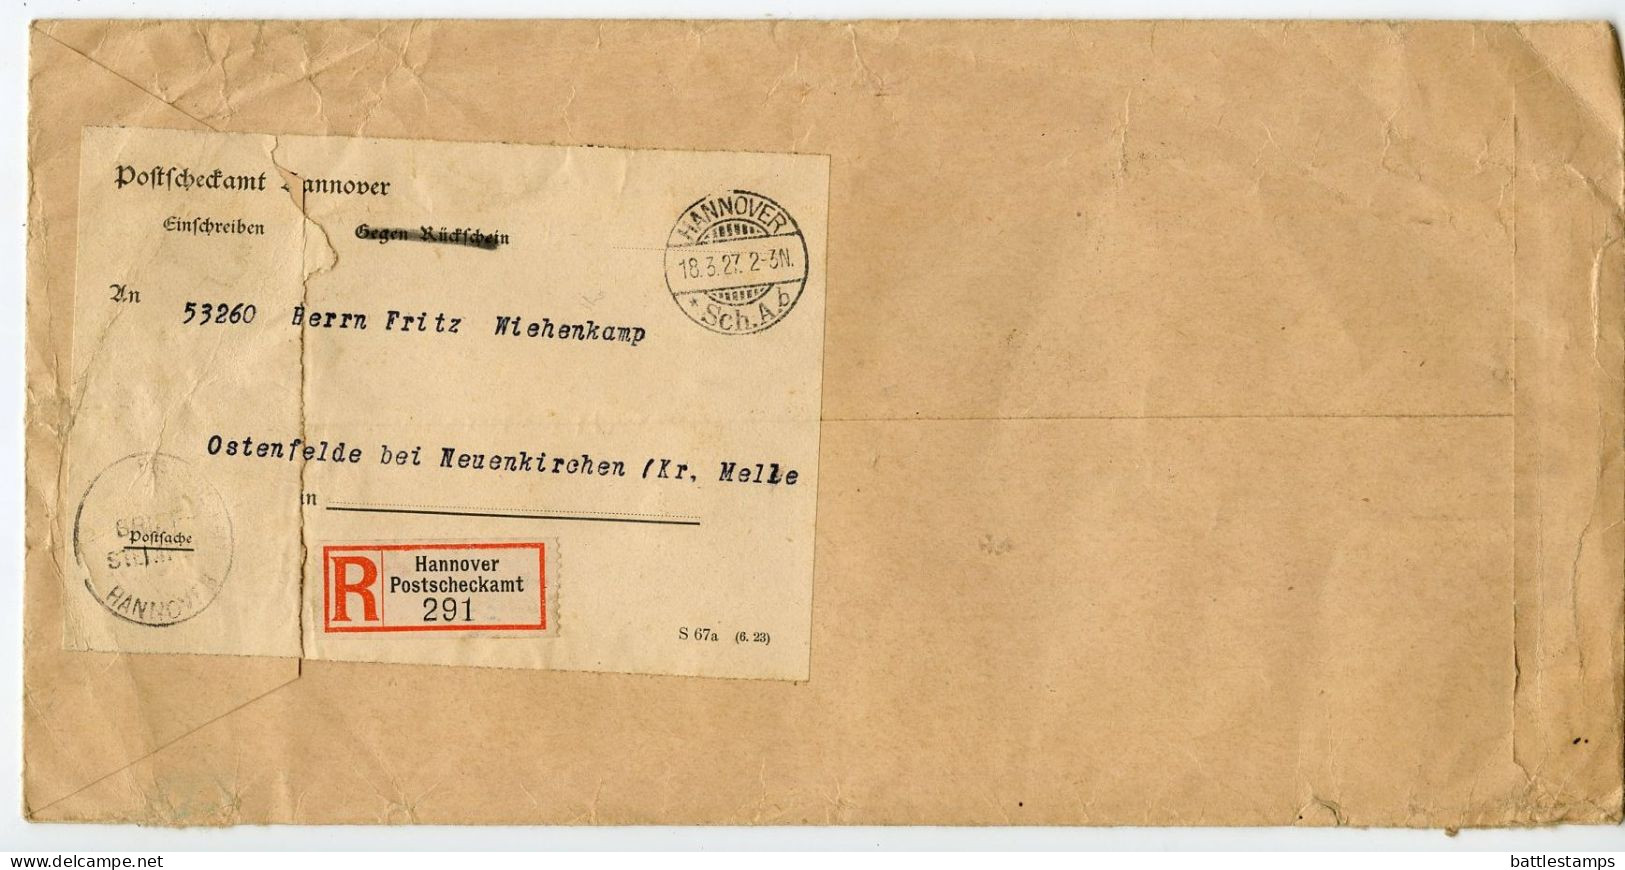 Germany 1927 Registered Postscheckamt Cover; Hannover To Ostenfelde Bei Neuenkirchen - Covers & Documents